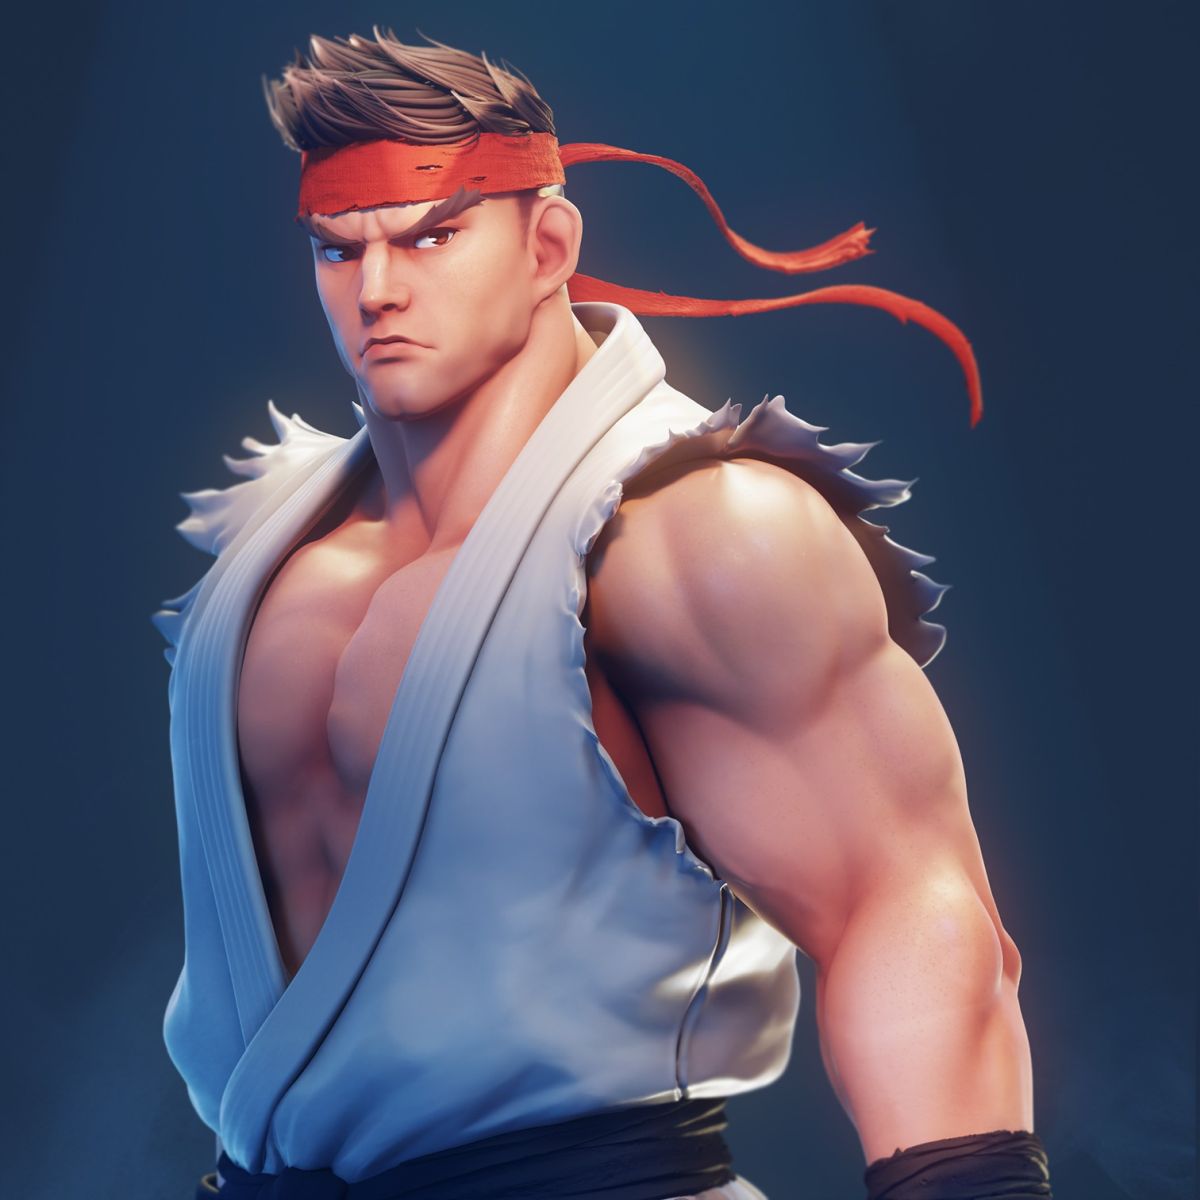 3d game character design ryu from street fighter by dan eder